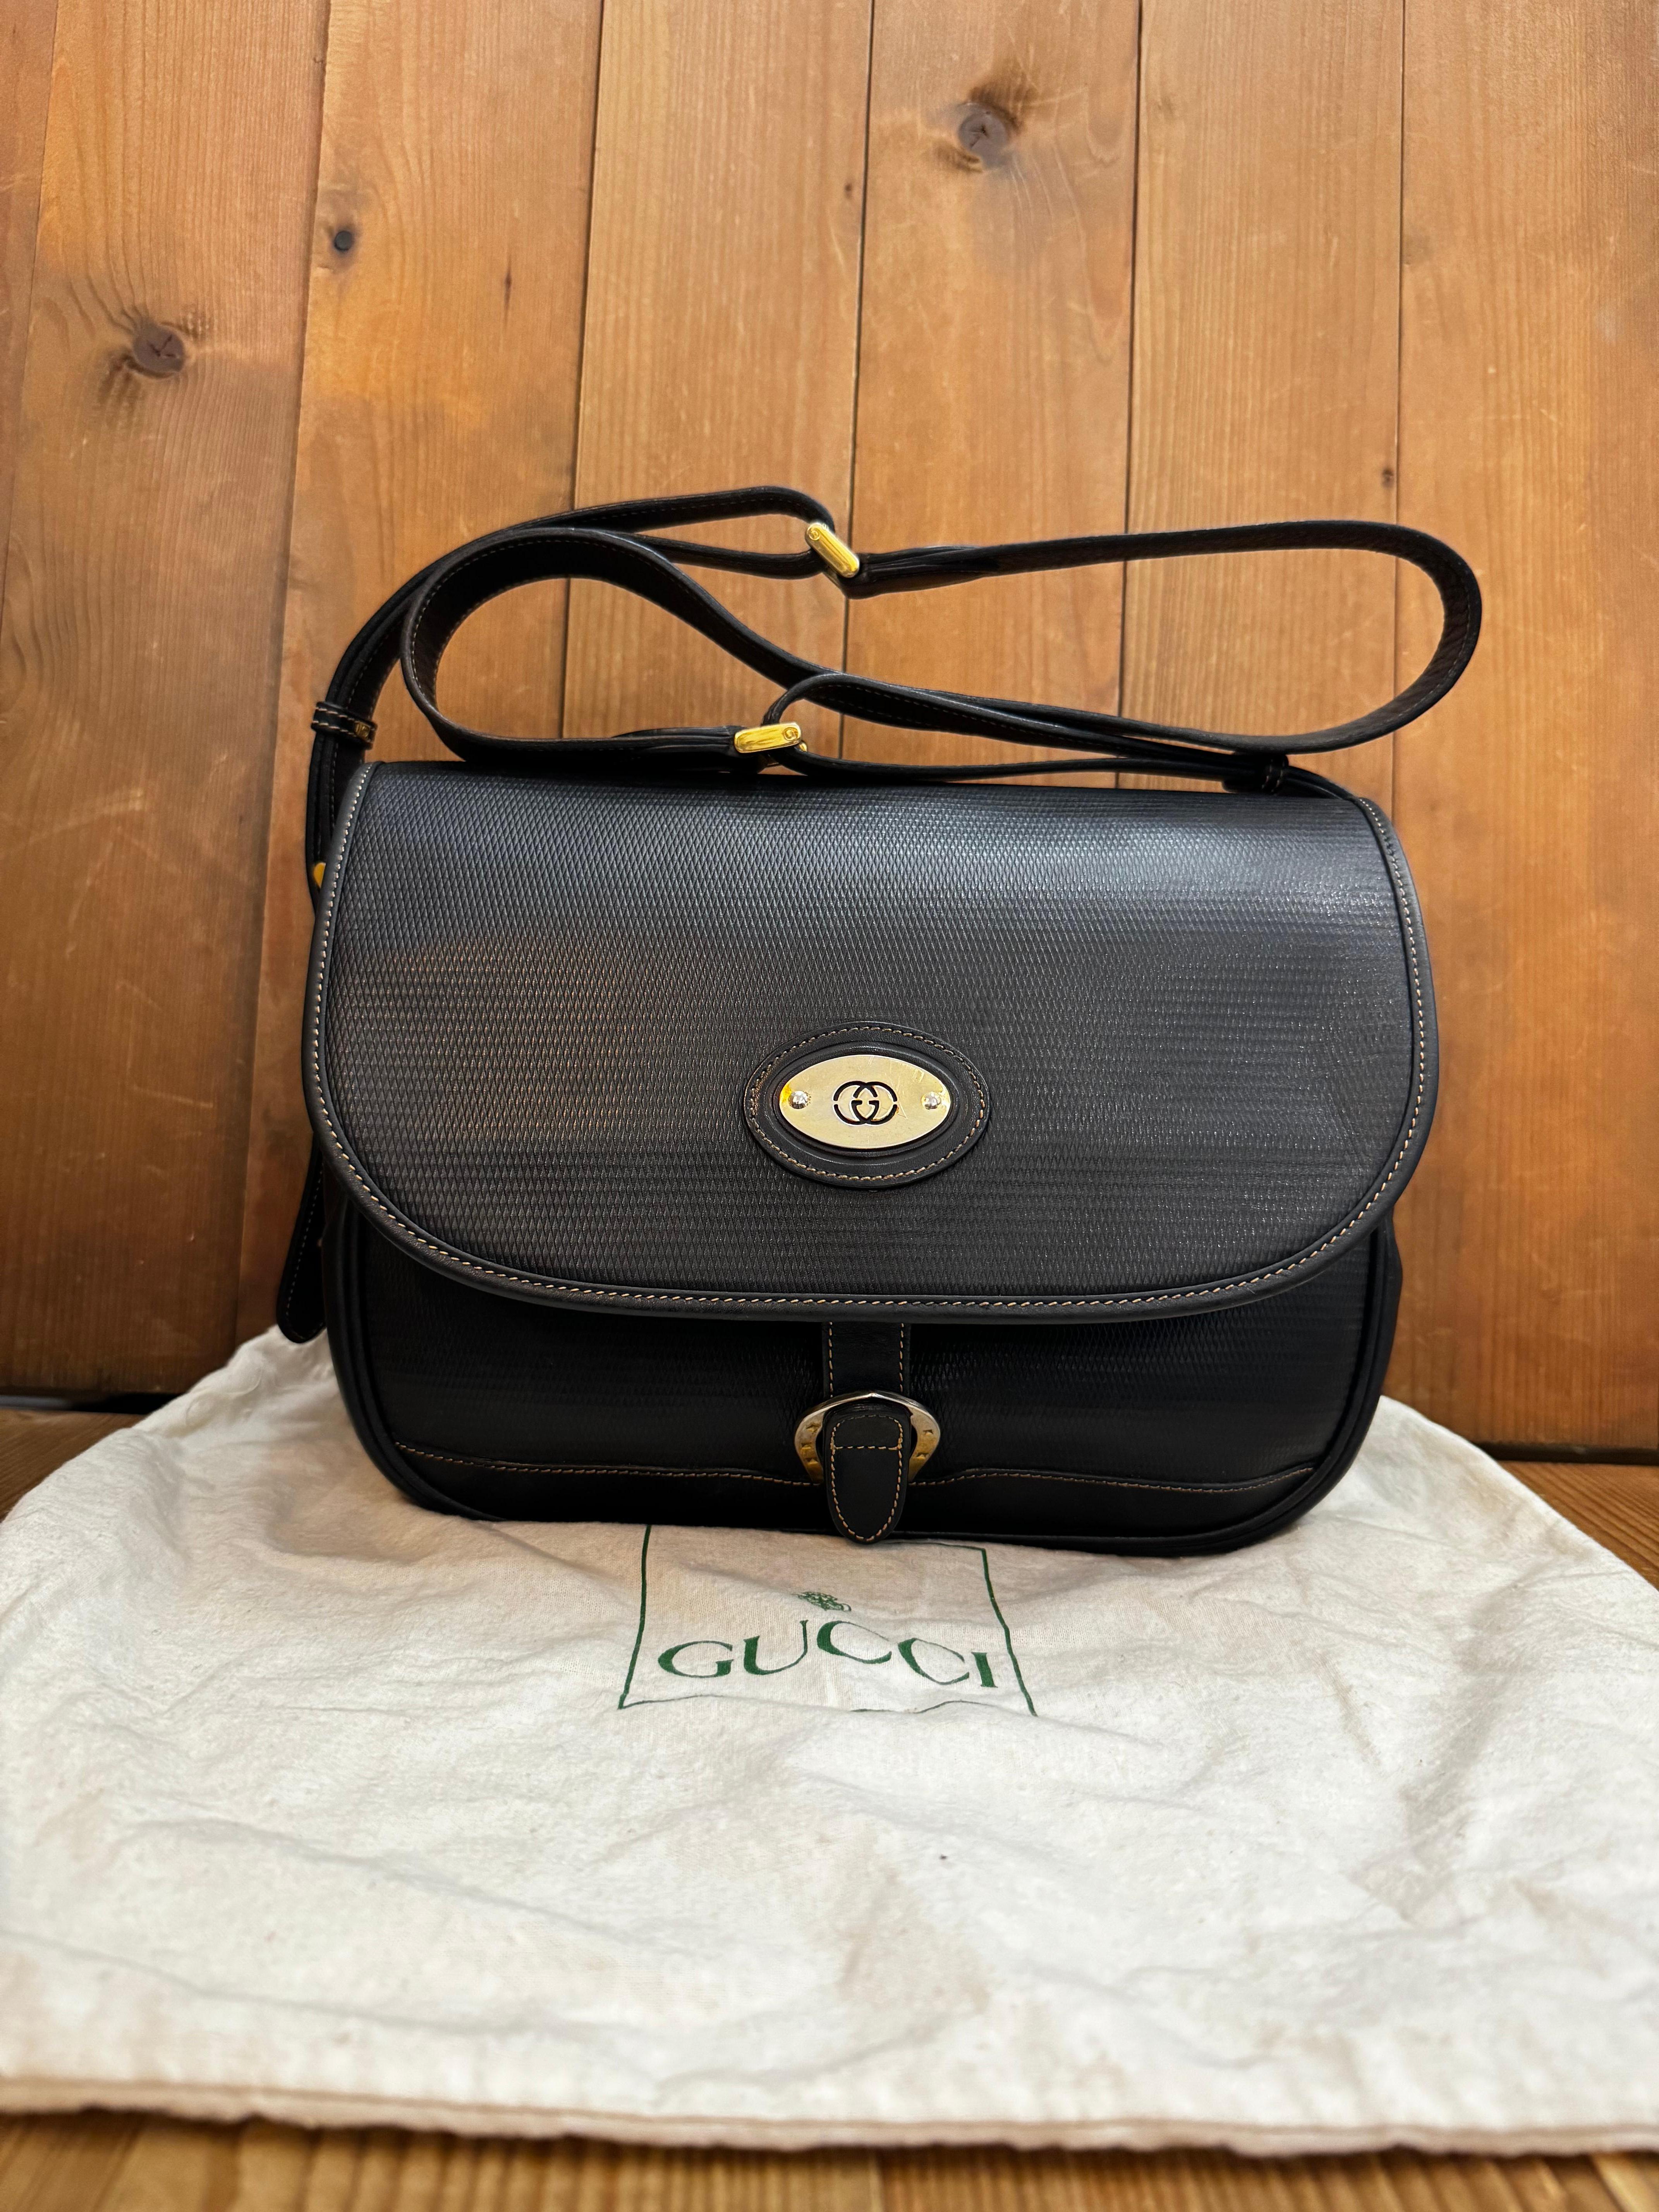 This vintage GUCCI camera crossbody bag is crafted of textured calfskin leather in black with equestrian accent. Front flap closure opens to a front zippered pocket and a main compartment lined with suede leather featuring a zippered pocket.